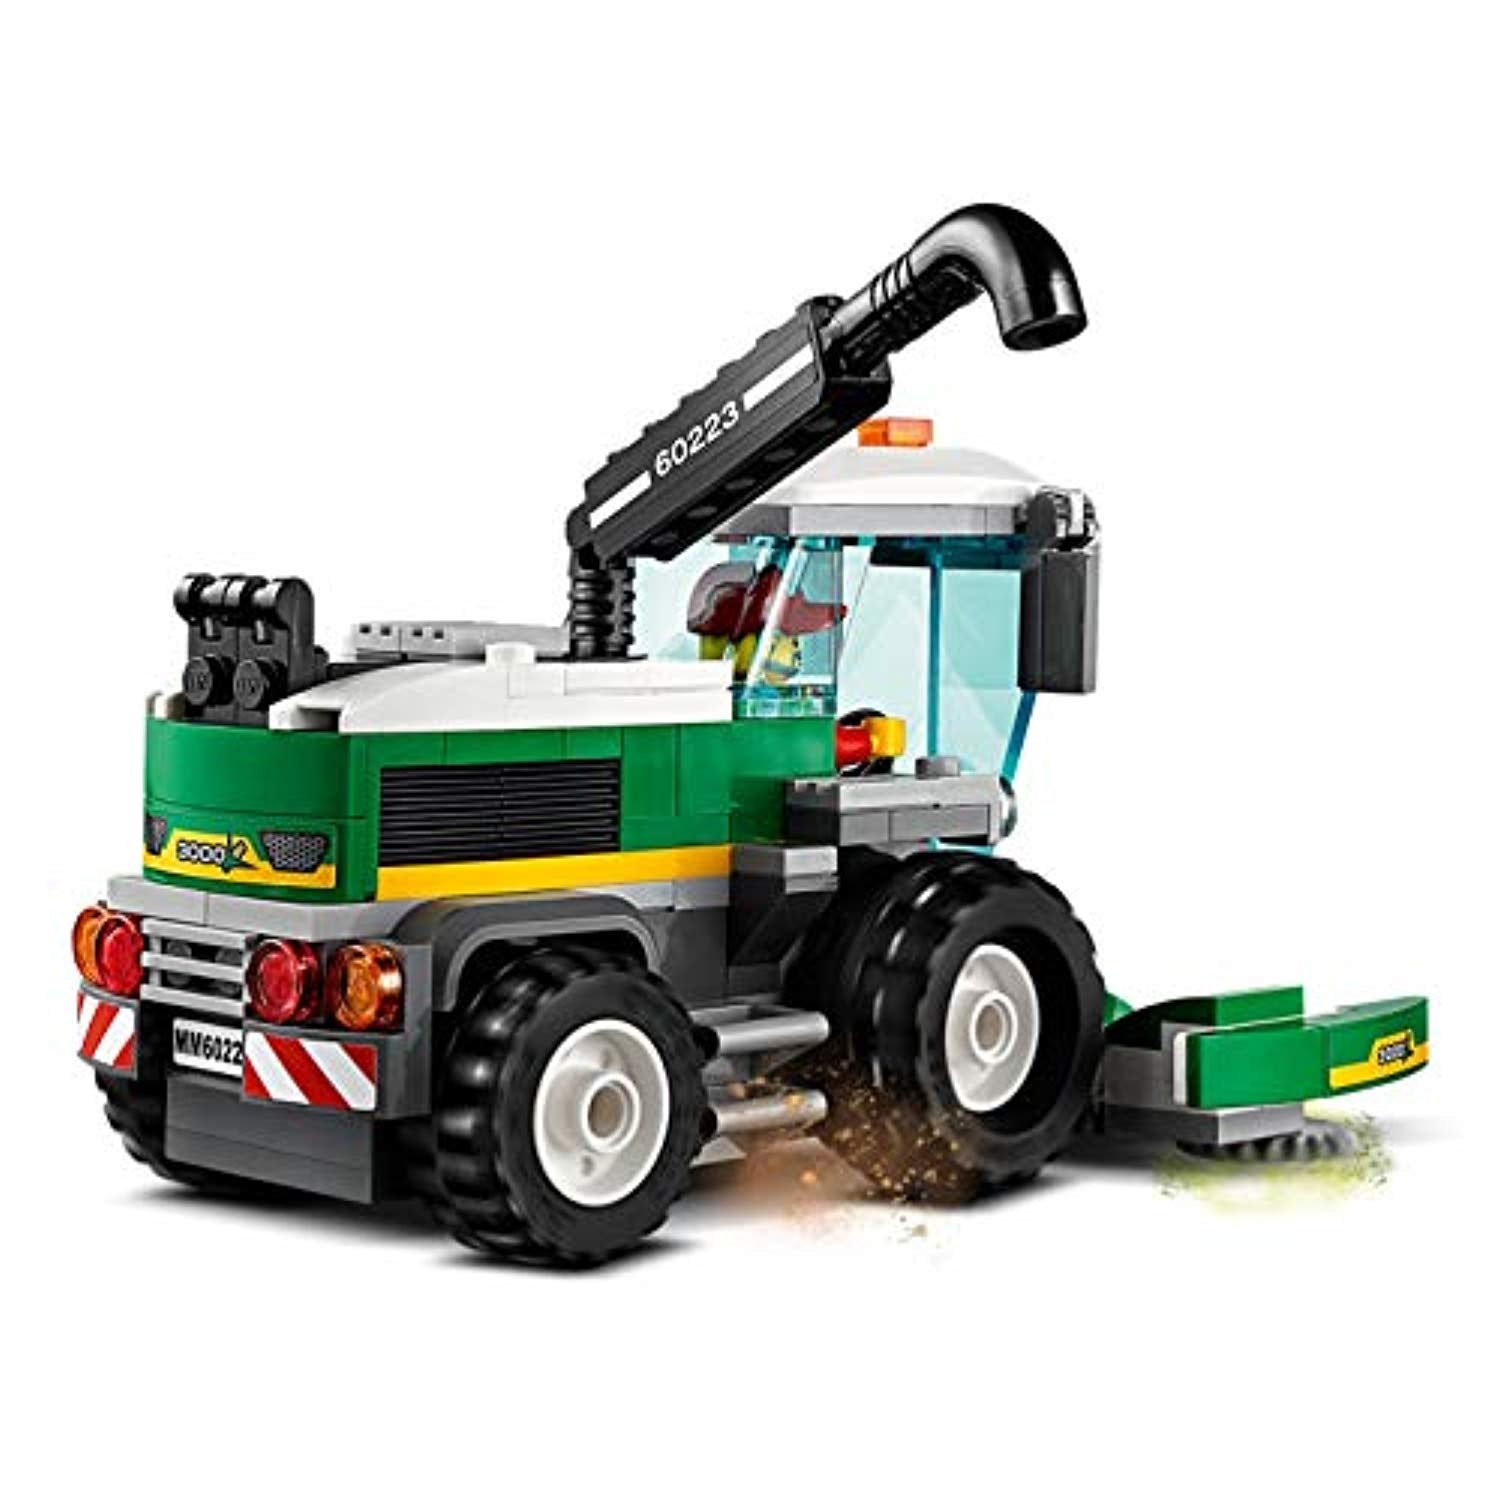 LEGO 60223 City Great Vehicles Harvester Transport with Truck and Trailer, plus Combine Tractor Toy, 2 Minifigures and Scarecrow Figure, Farm Toys for 5+ - Offer Games